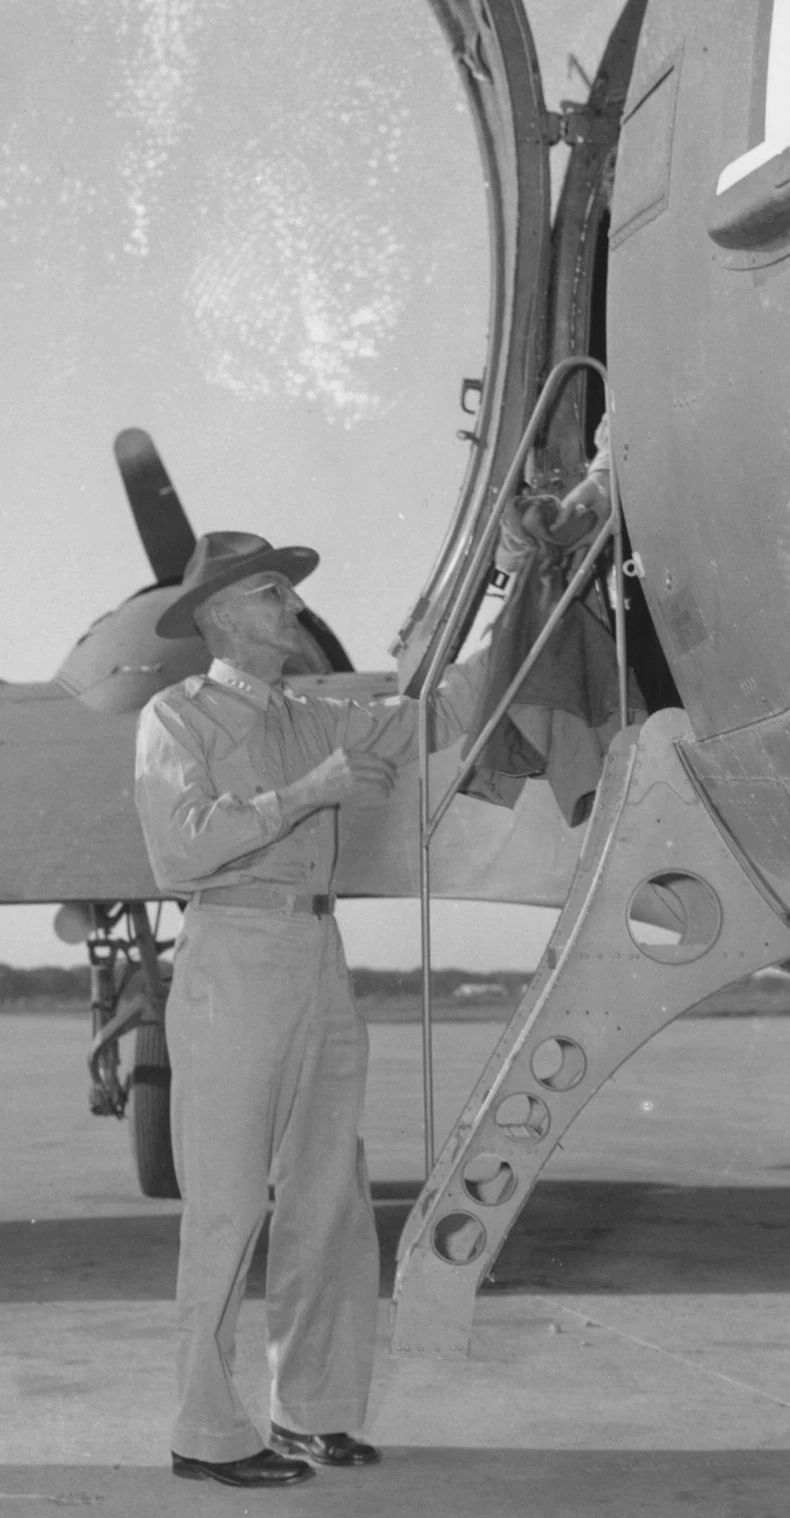 General Joseph Stilwell boarding a transport aircraft at the airport in New Delhi, India for Chongqing, China, Sep 1944